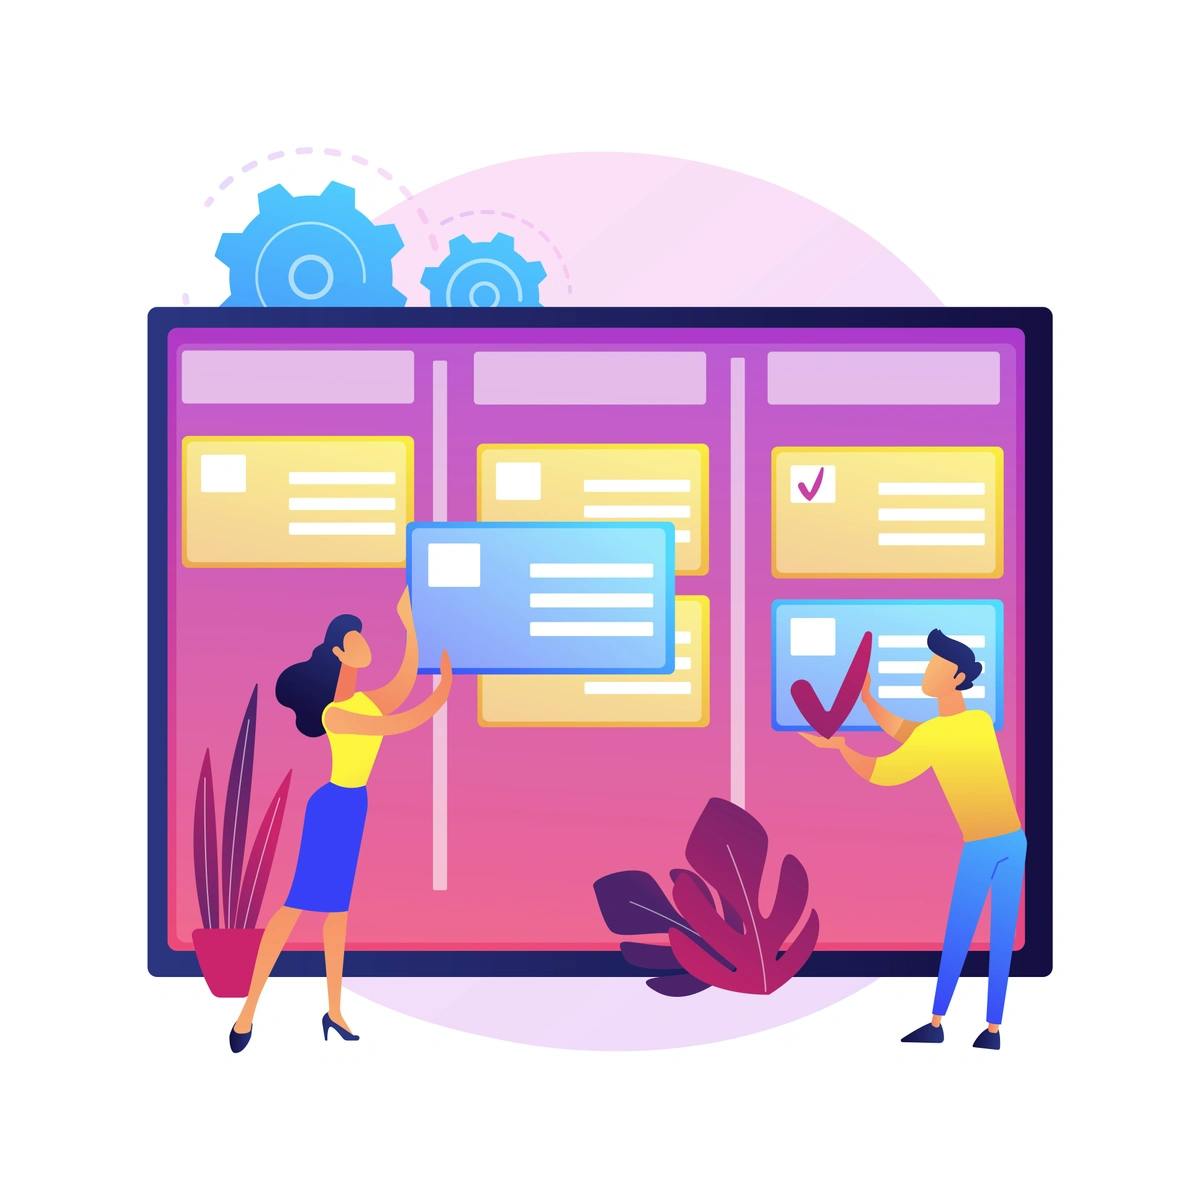 Flat design illustration of a man and woman organizing tasks on a large kanban board with colorful sticky notes.